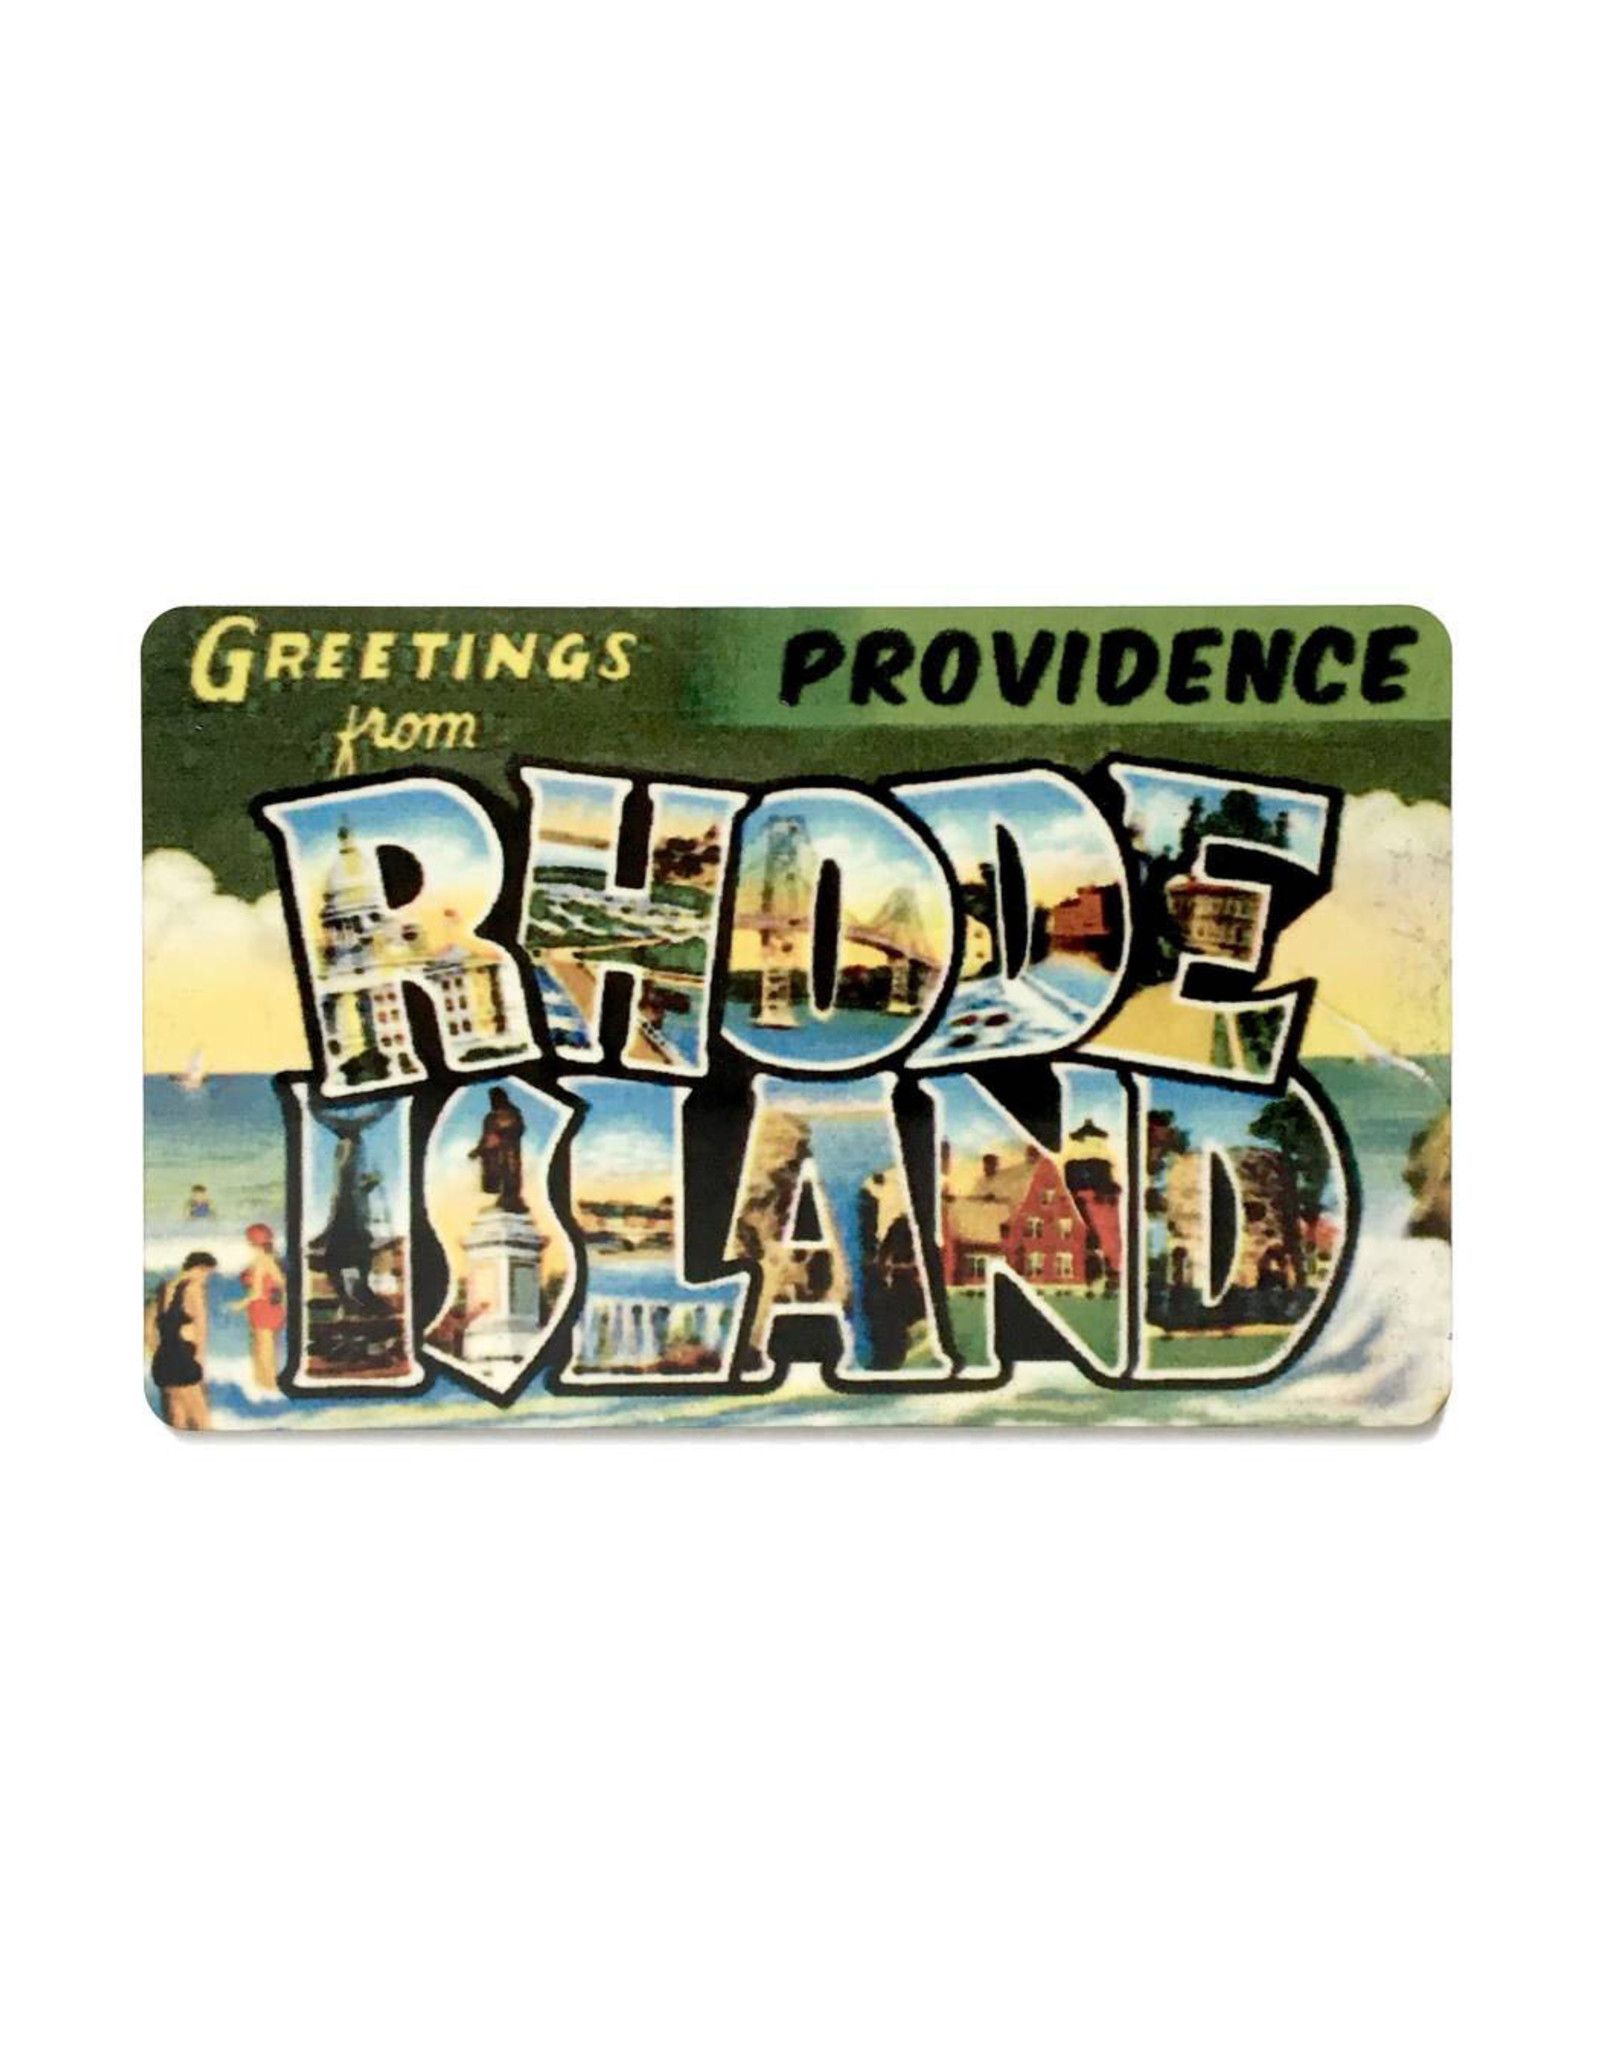 Greetings from Providence, RHODE ISLAND Magnet